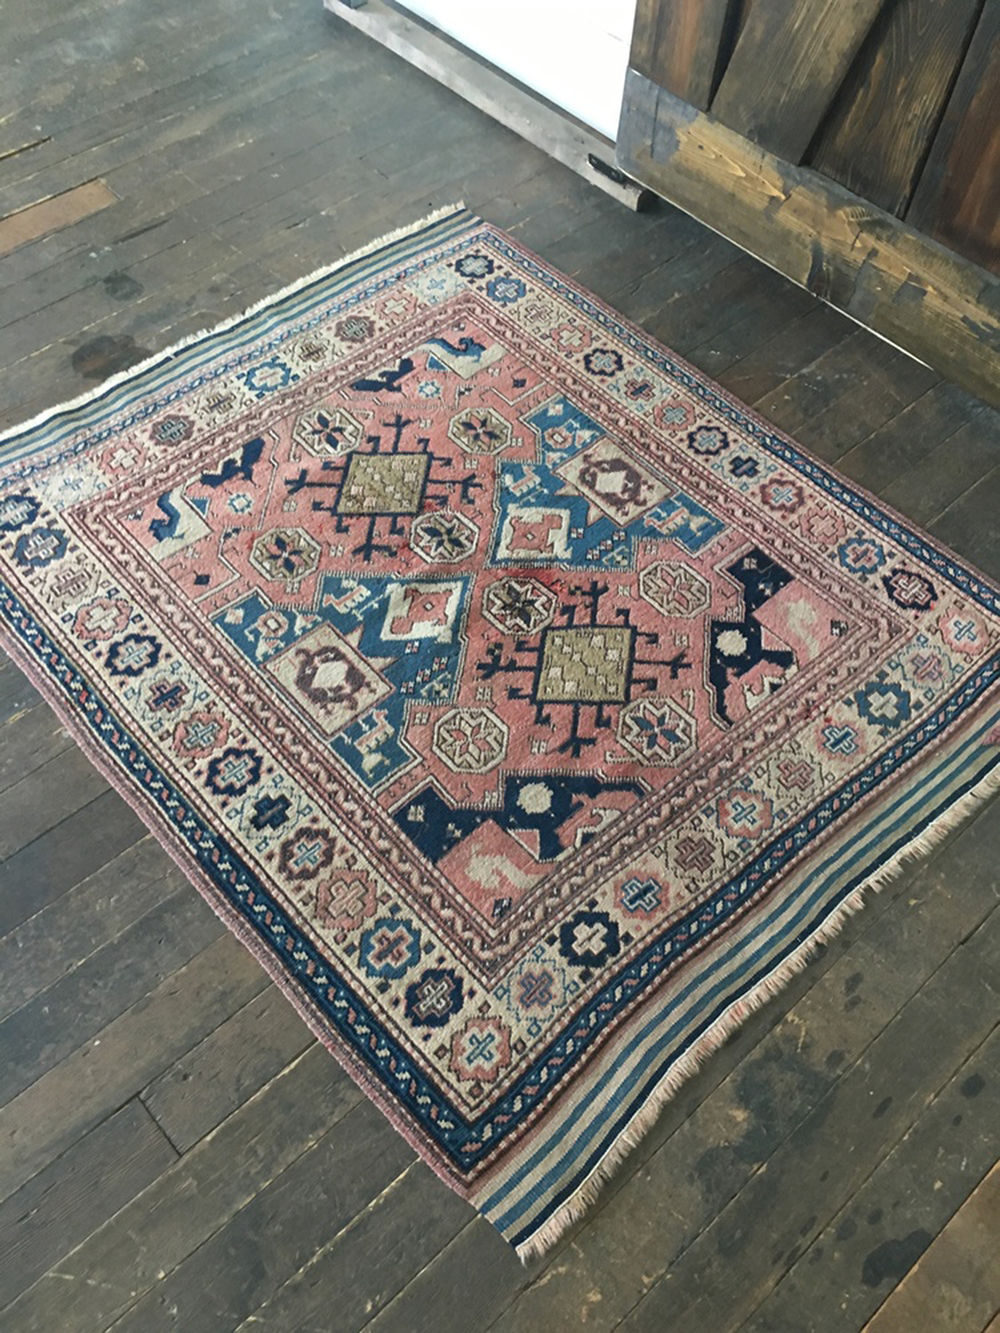 What are some good online rug shops?